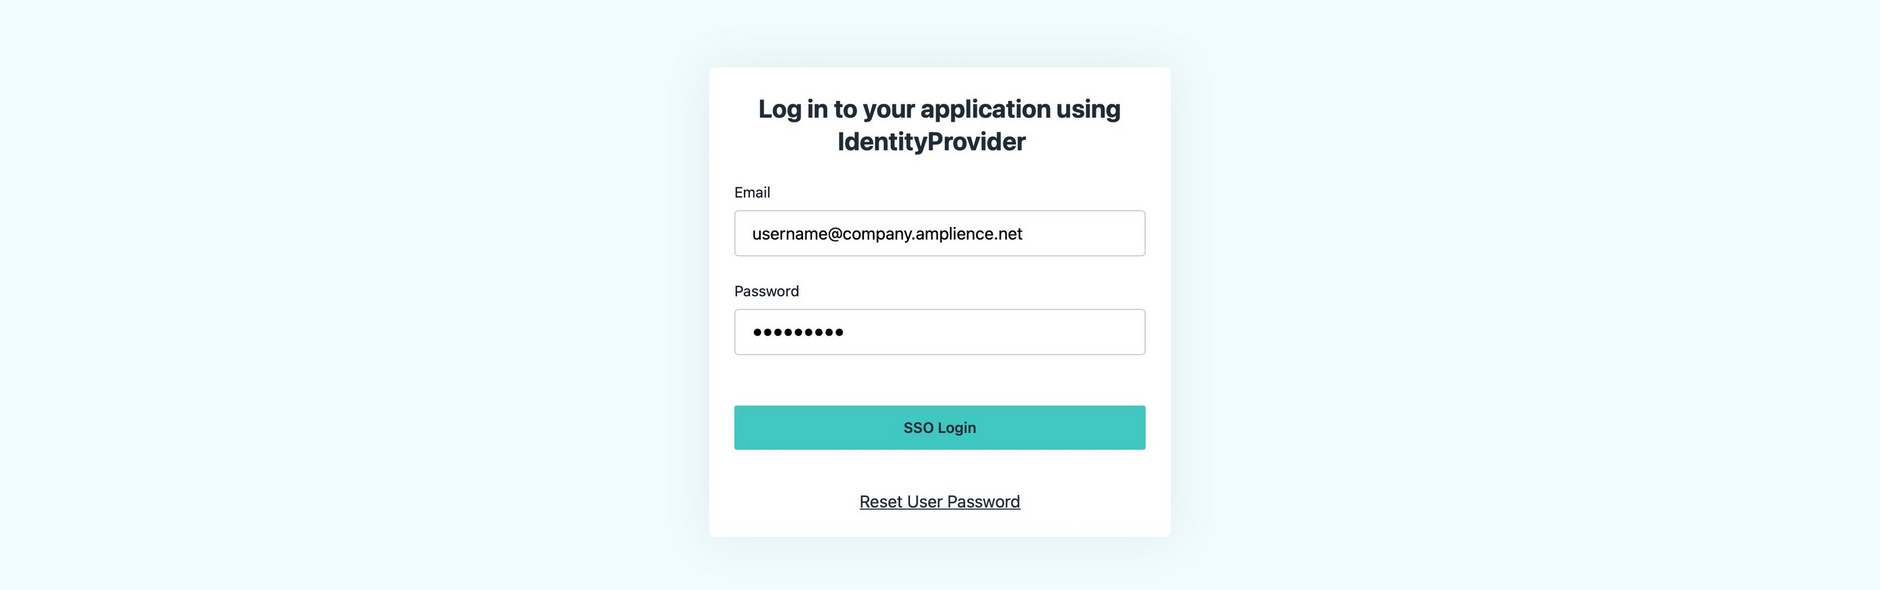 You are redirected to the login page for the identity provider used by your organization. You can log in using your usual credentials.